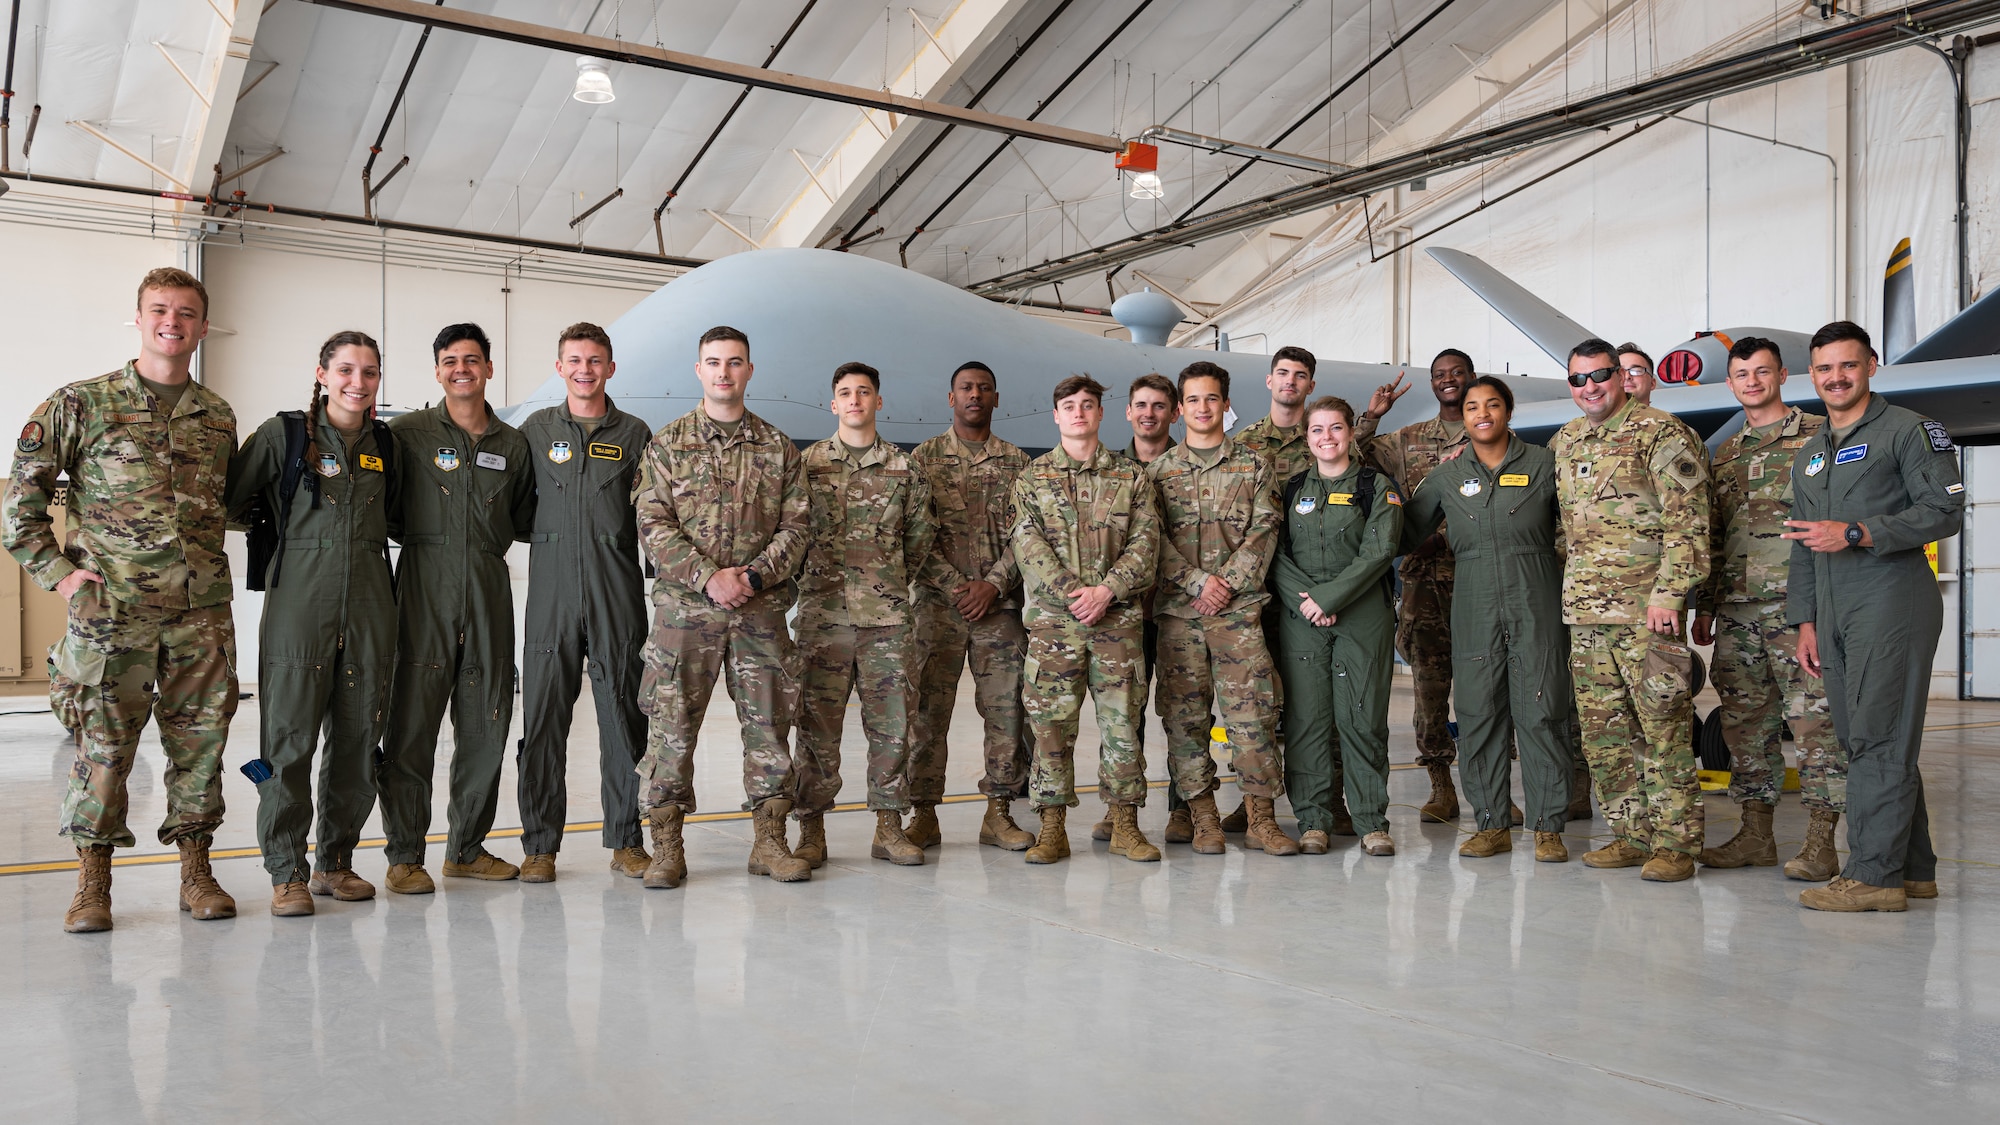 Airmen pose for a group photo in front of a remotely piloted drone aircraft.